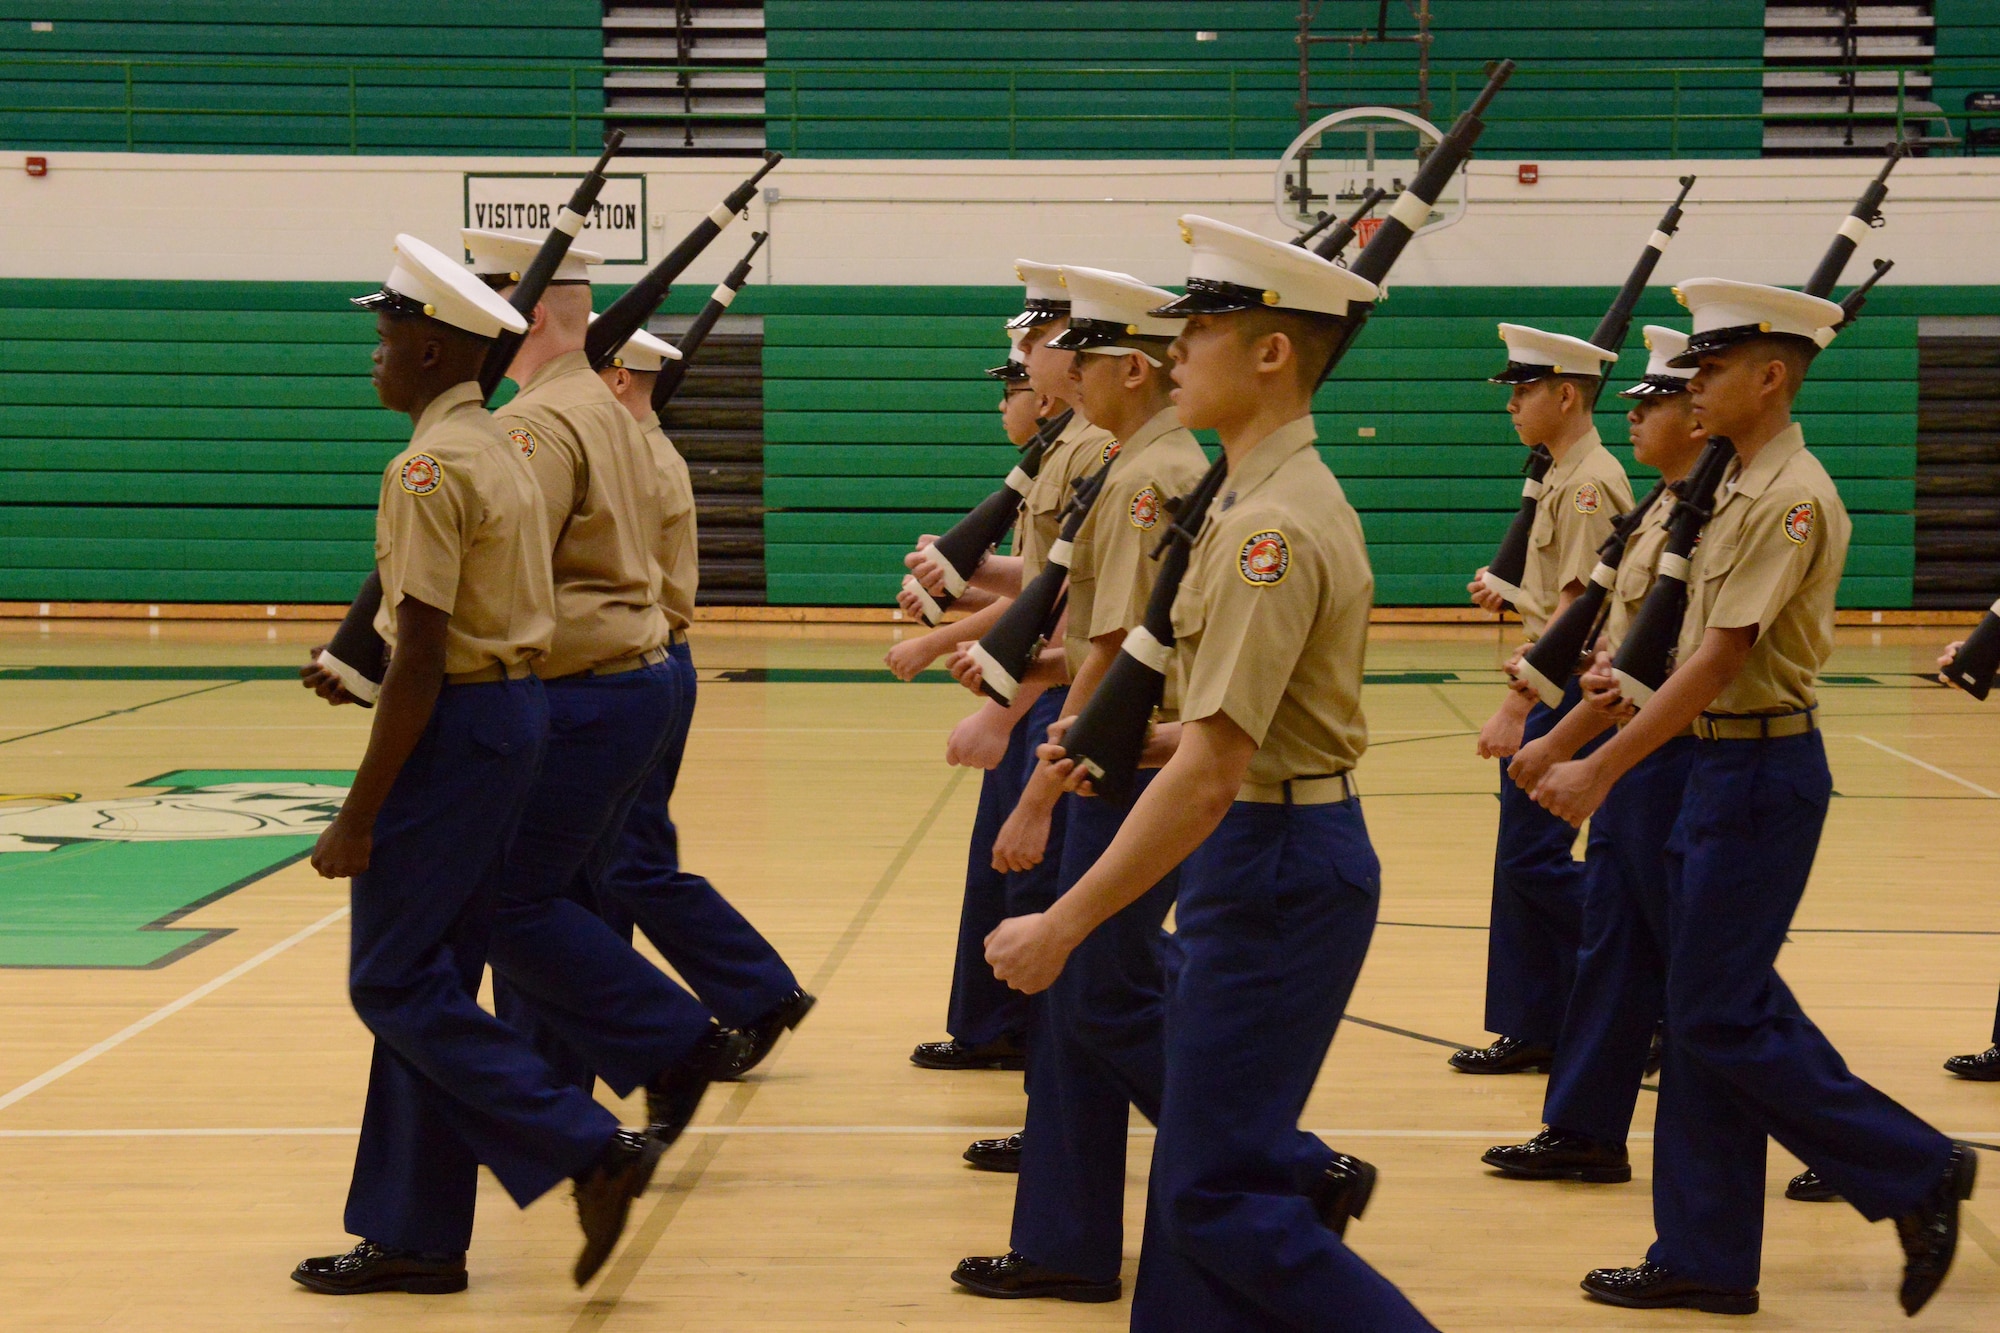 The North High JROTC performs their rifle drill portion of the JROTC competition at North High School, Des Moines, Iowa on April 1, 2017. The North High JROTC received many different awards for their outstanding performances during the day, including the rifle drill. (U.S. Air National Guard photo by Airman Katelyn Sprott)